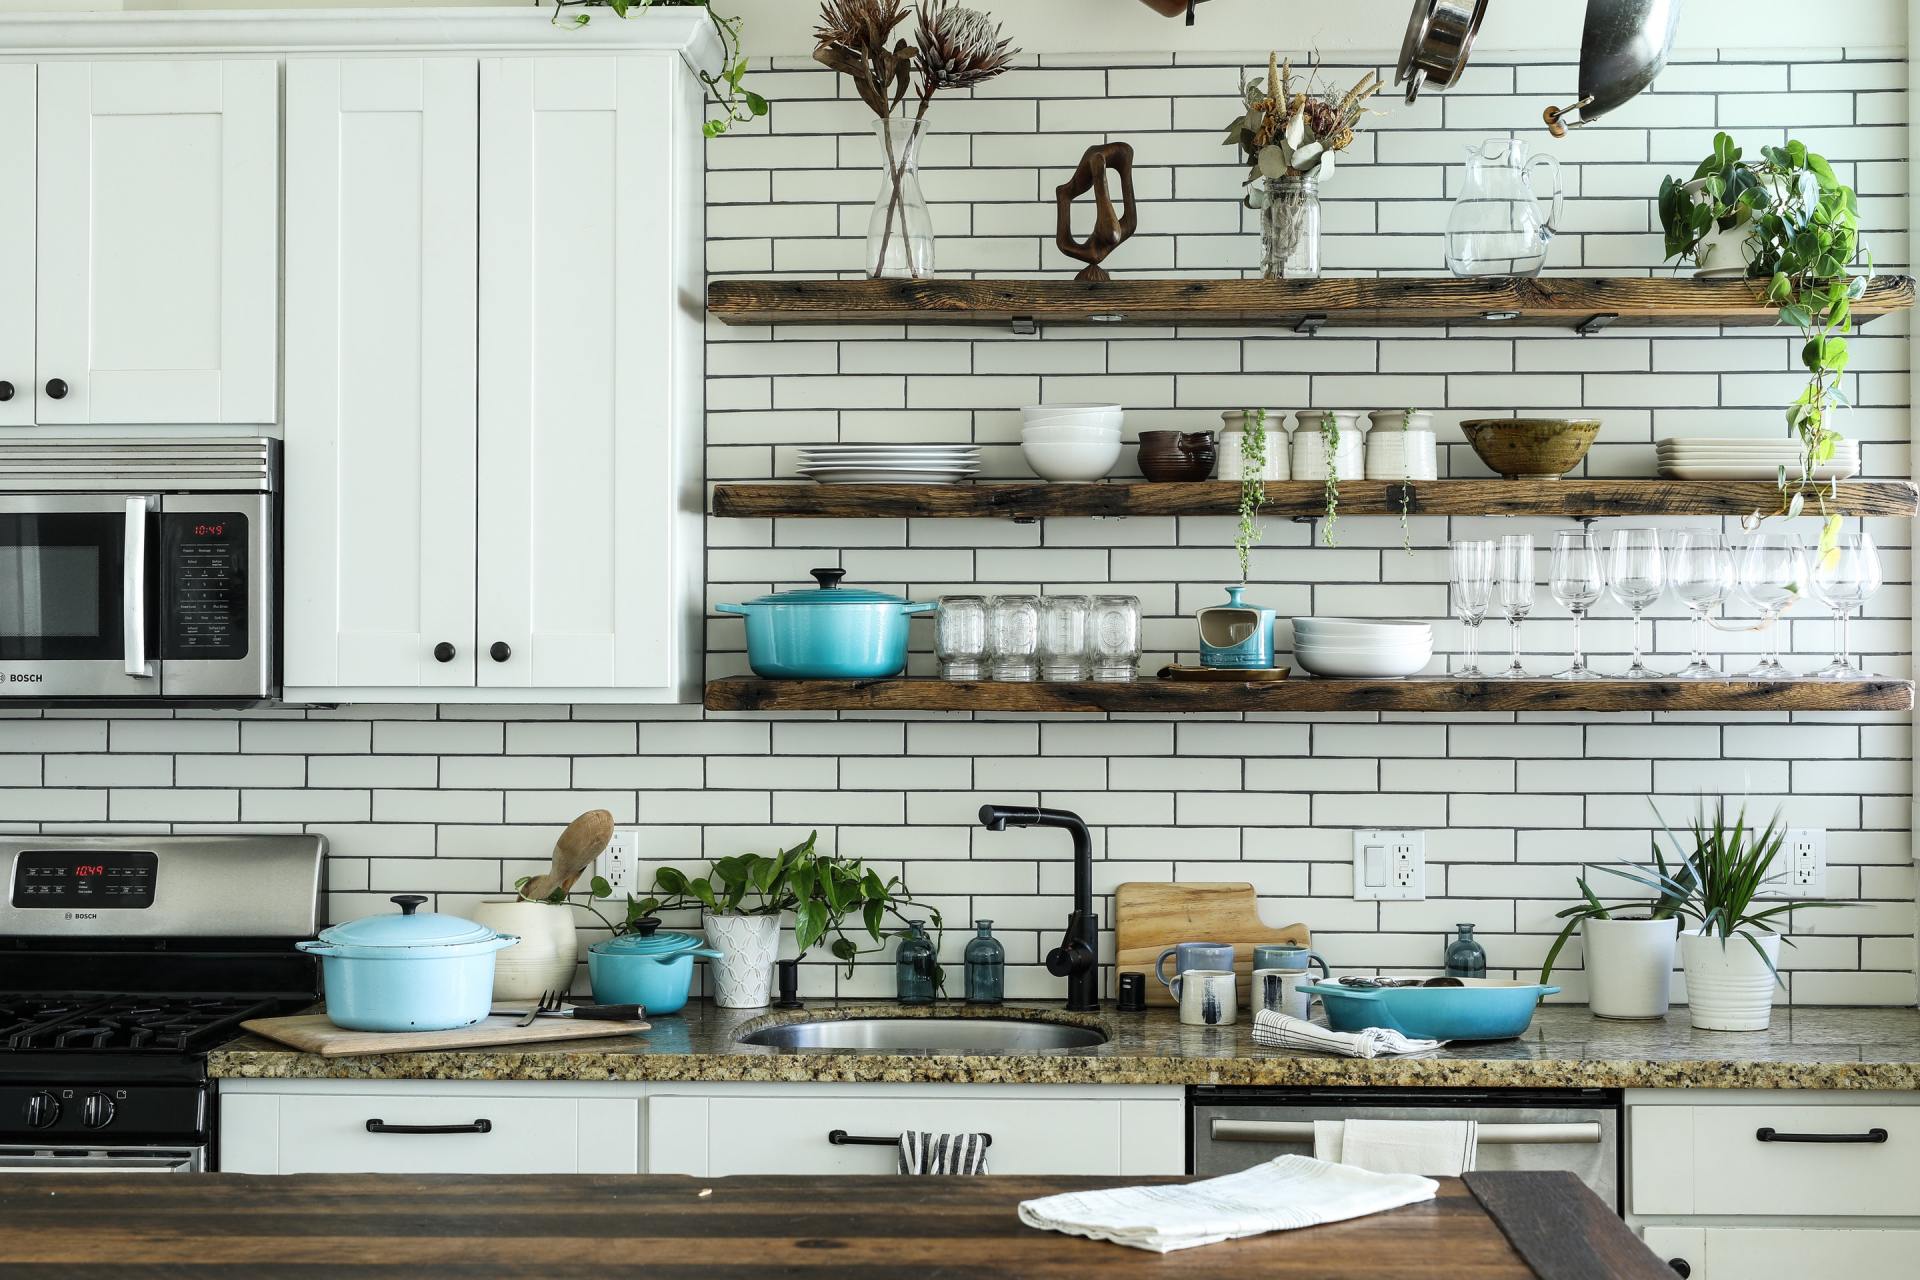 mix and match textures to give your kitchen a rustic-modern feeling